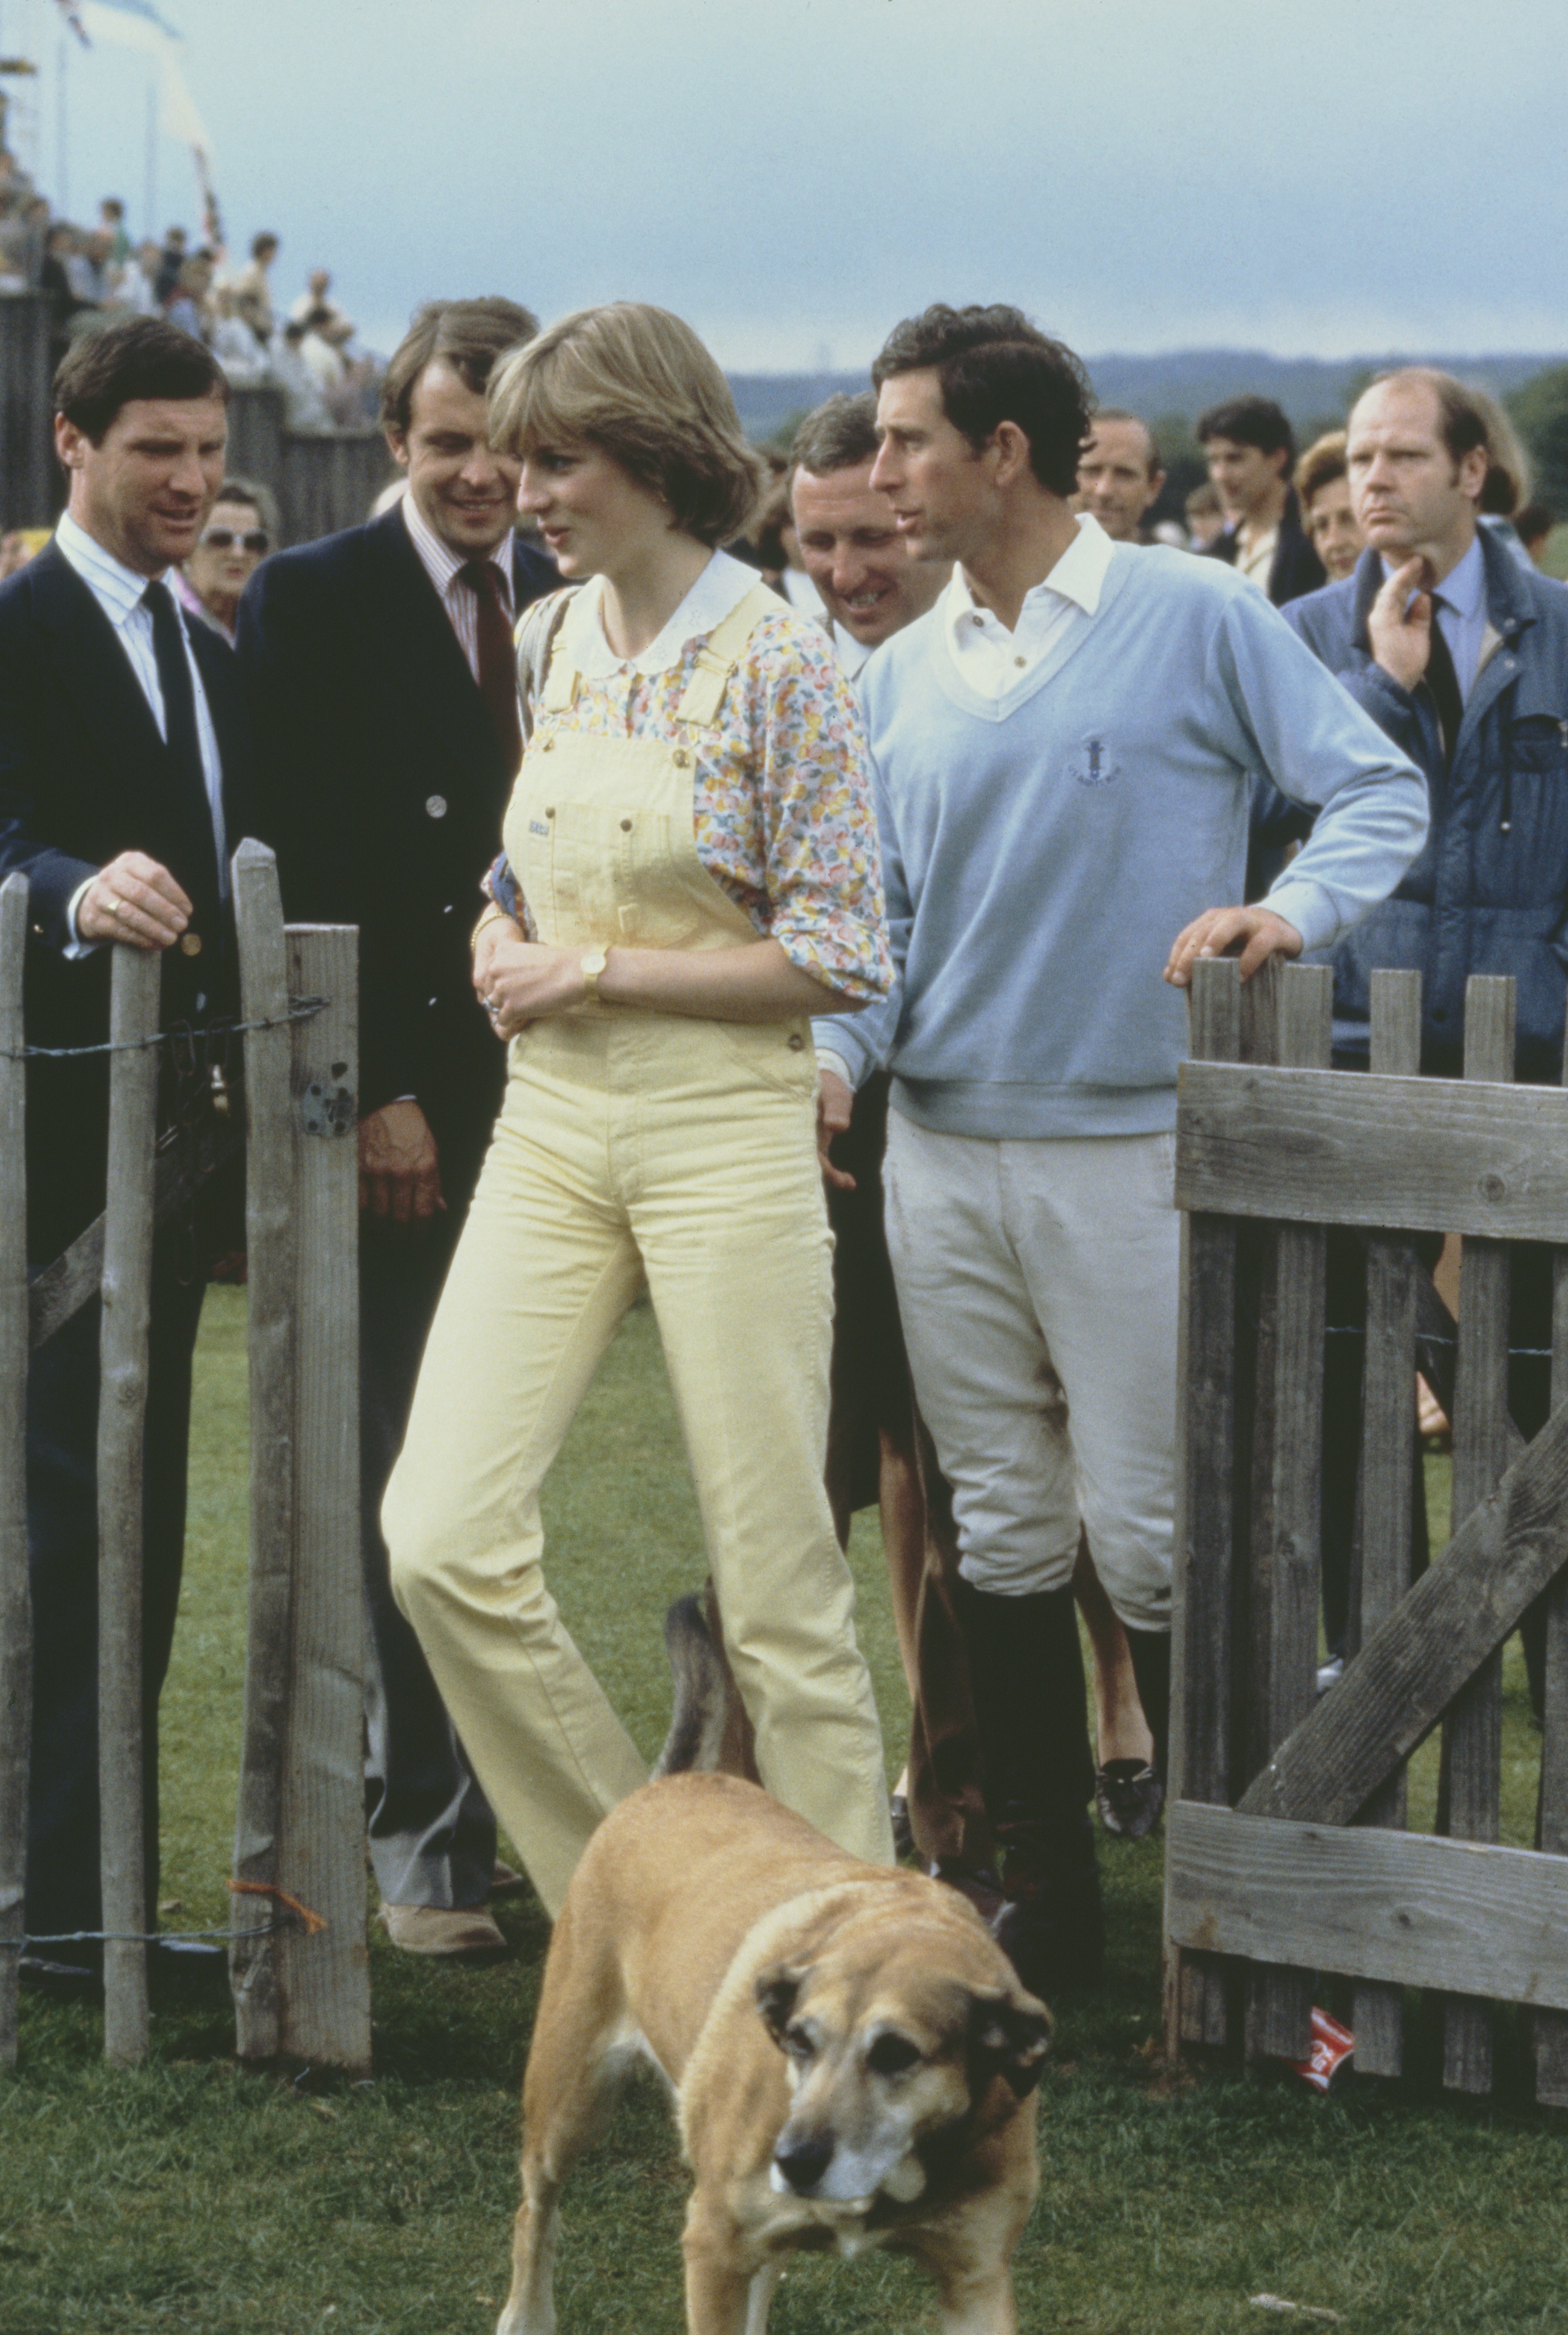 1981 In sunny dungarees and a floral-print blouse at Cowdray Park Polo Club in Gloucestershire with her fiancé. (Foto: Getty Images)